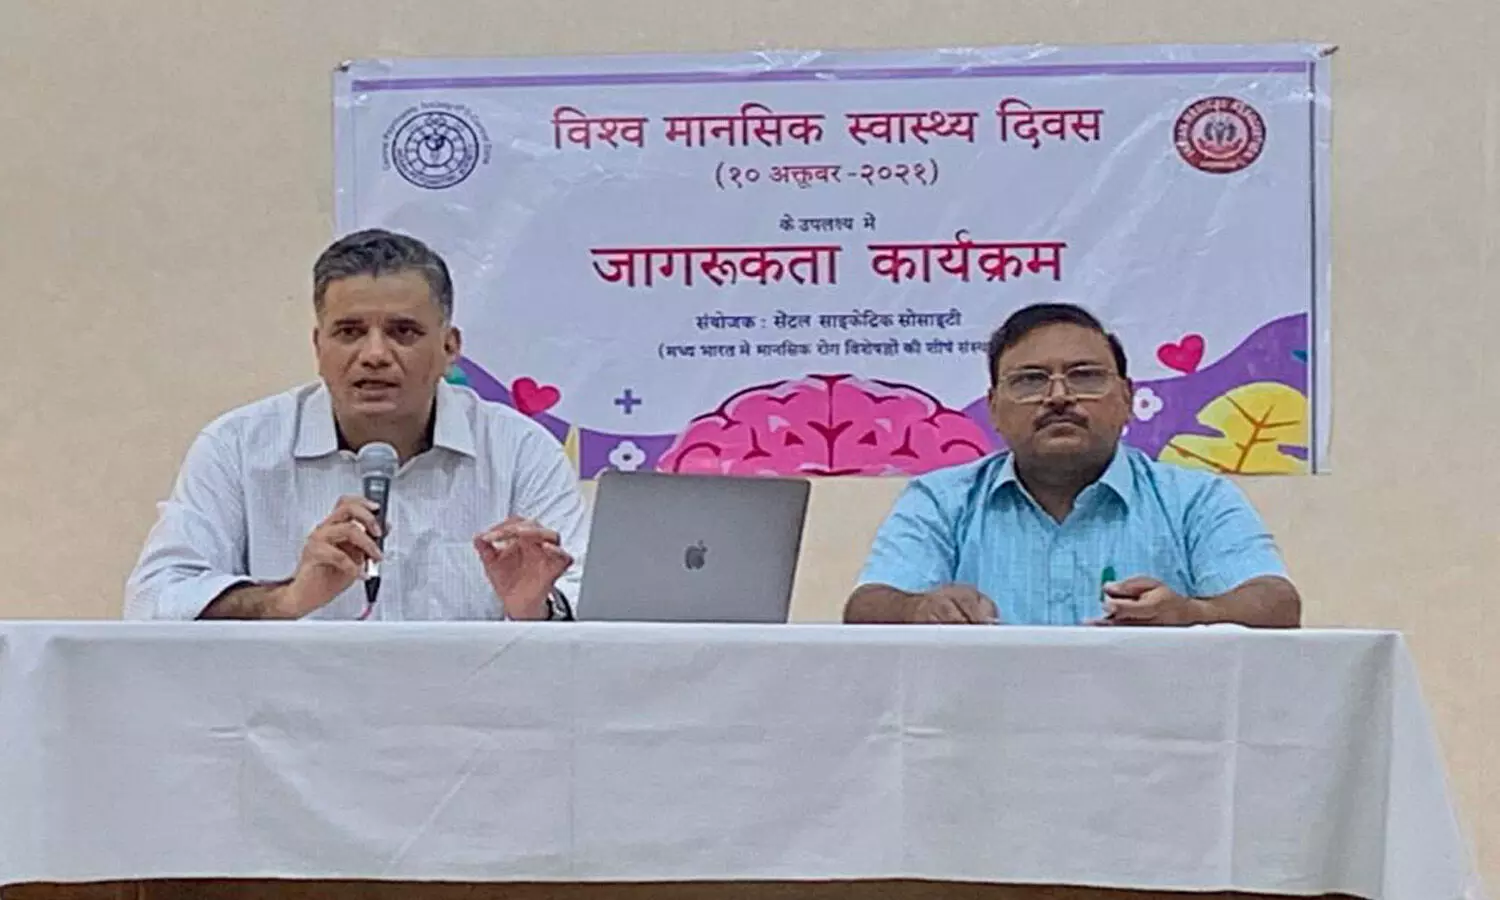 World Mental Health Day 2021: The health argument was organized in Lucknow to raise awareness